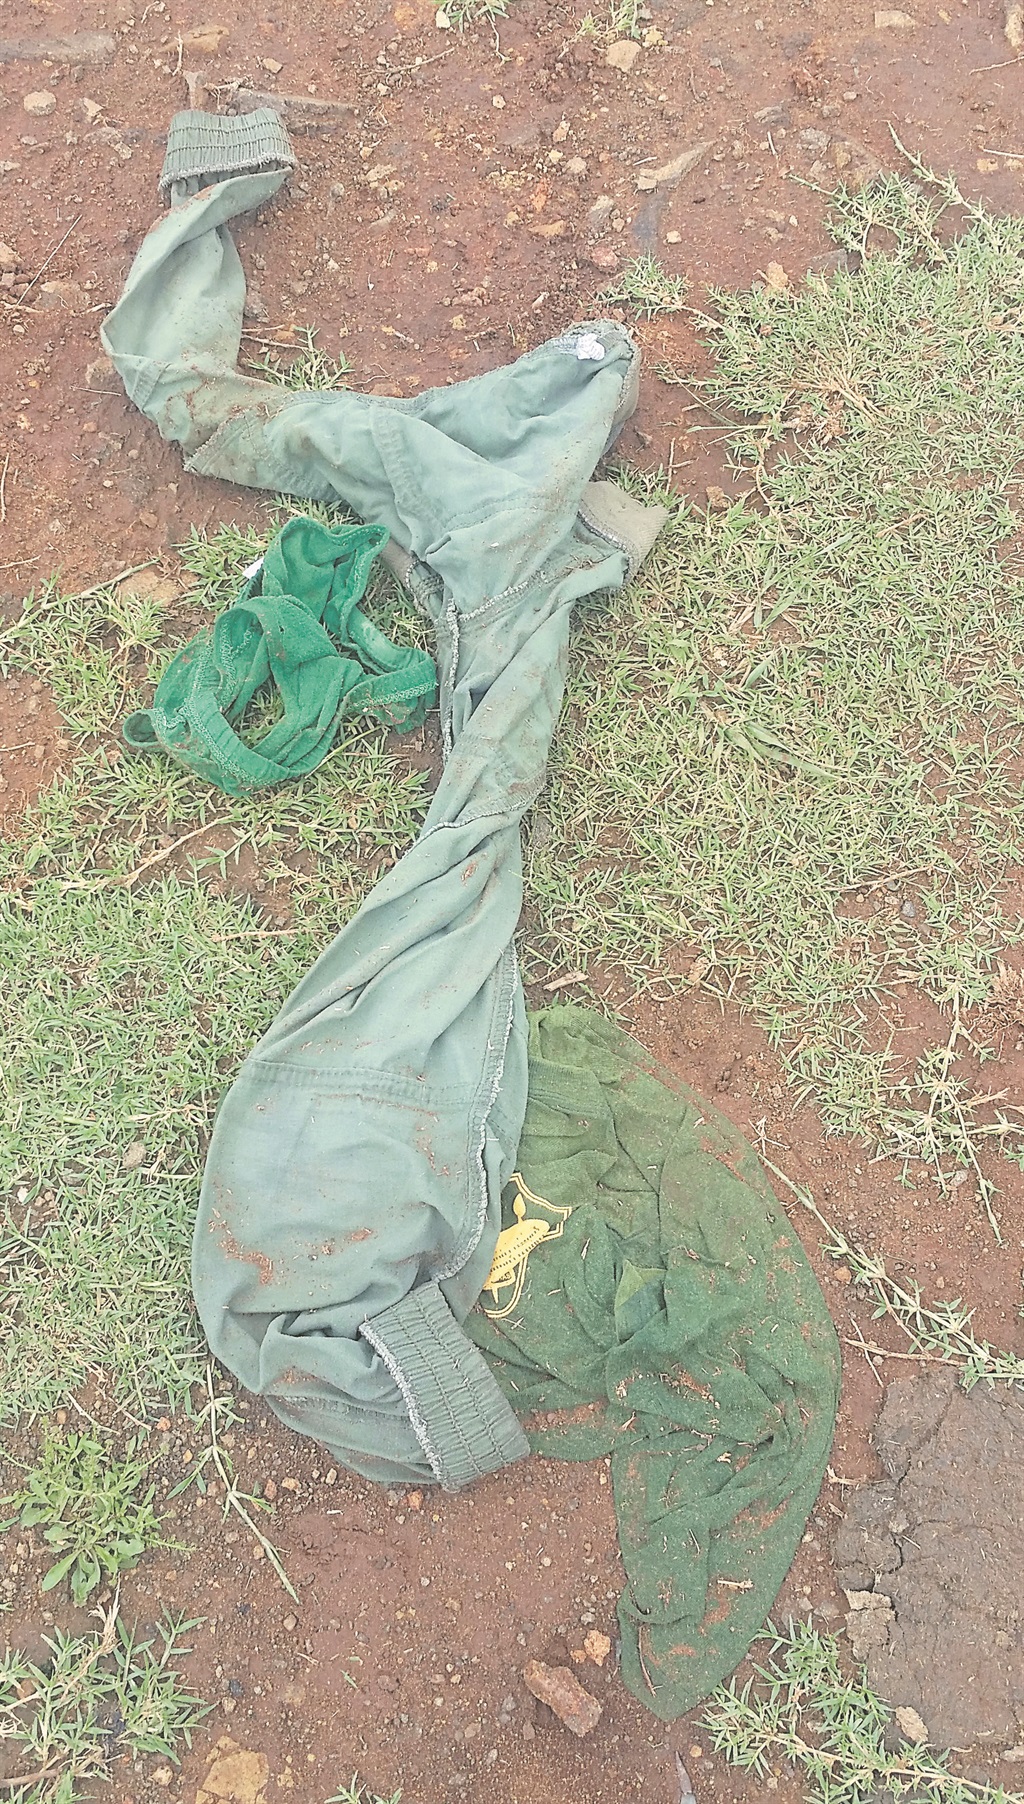 A search is underway for the body of a 10 year-old boy who drowned late yesterday in Mthatha Dam. His clothes were found by community members at the spot where he took off his clothes before going in with his friends.  Photo by Yanga Soji  